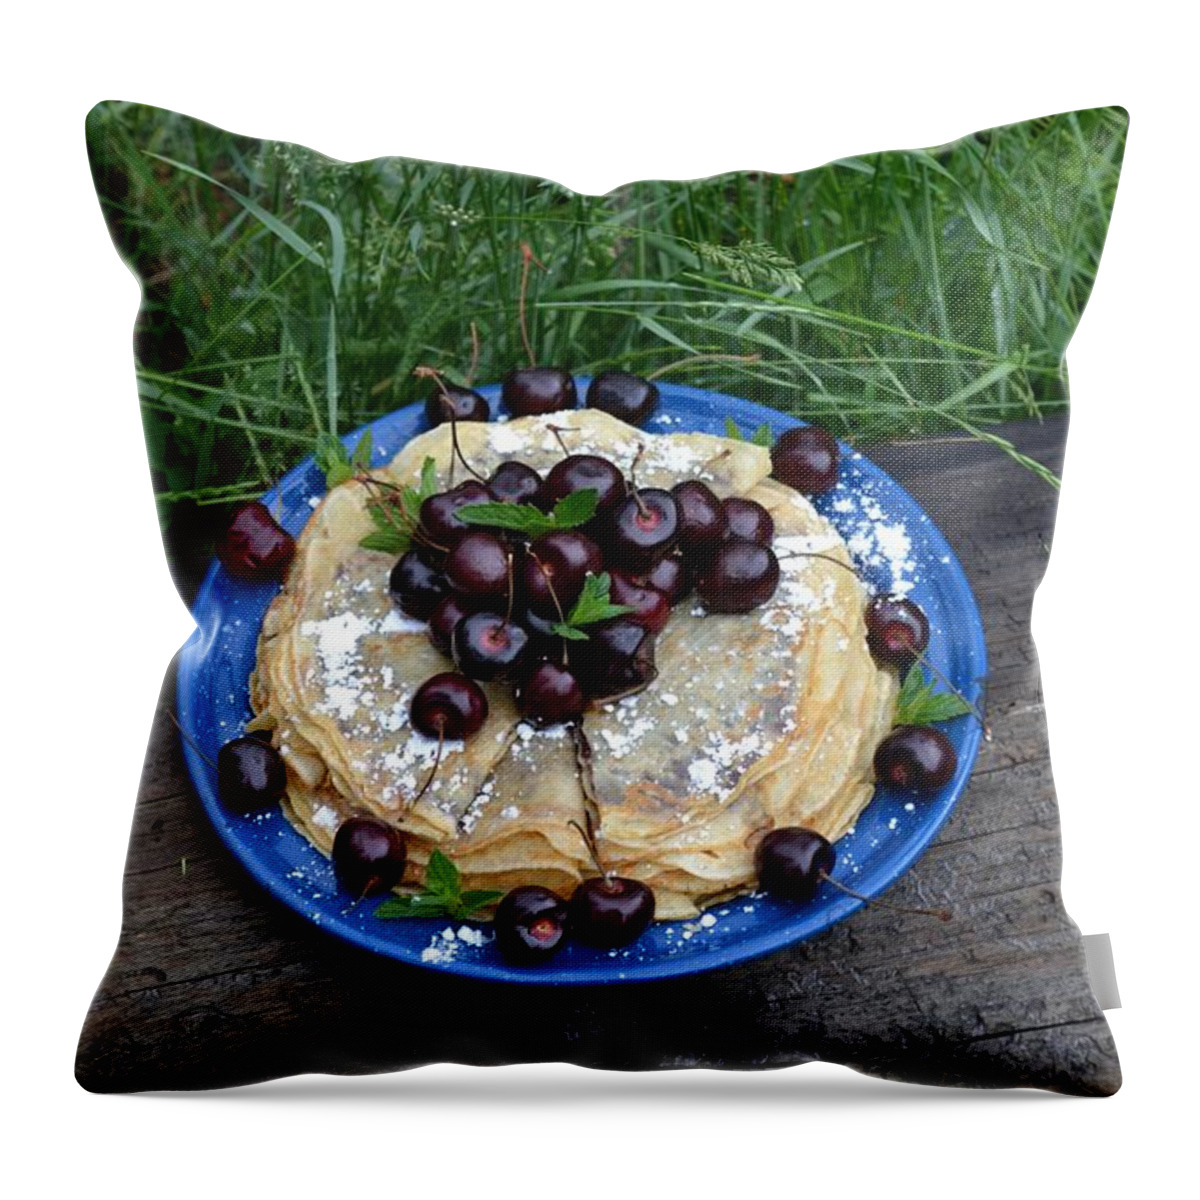 Food Photography Throw Pillow featuring the photograph Crepes by Alden White Ballard